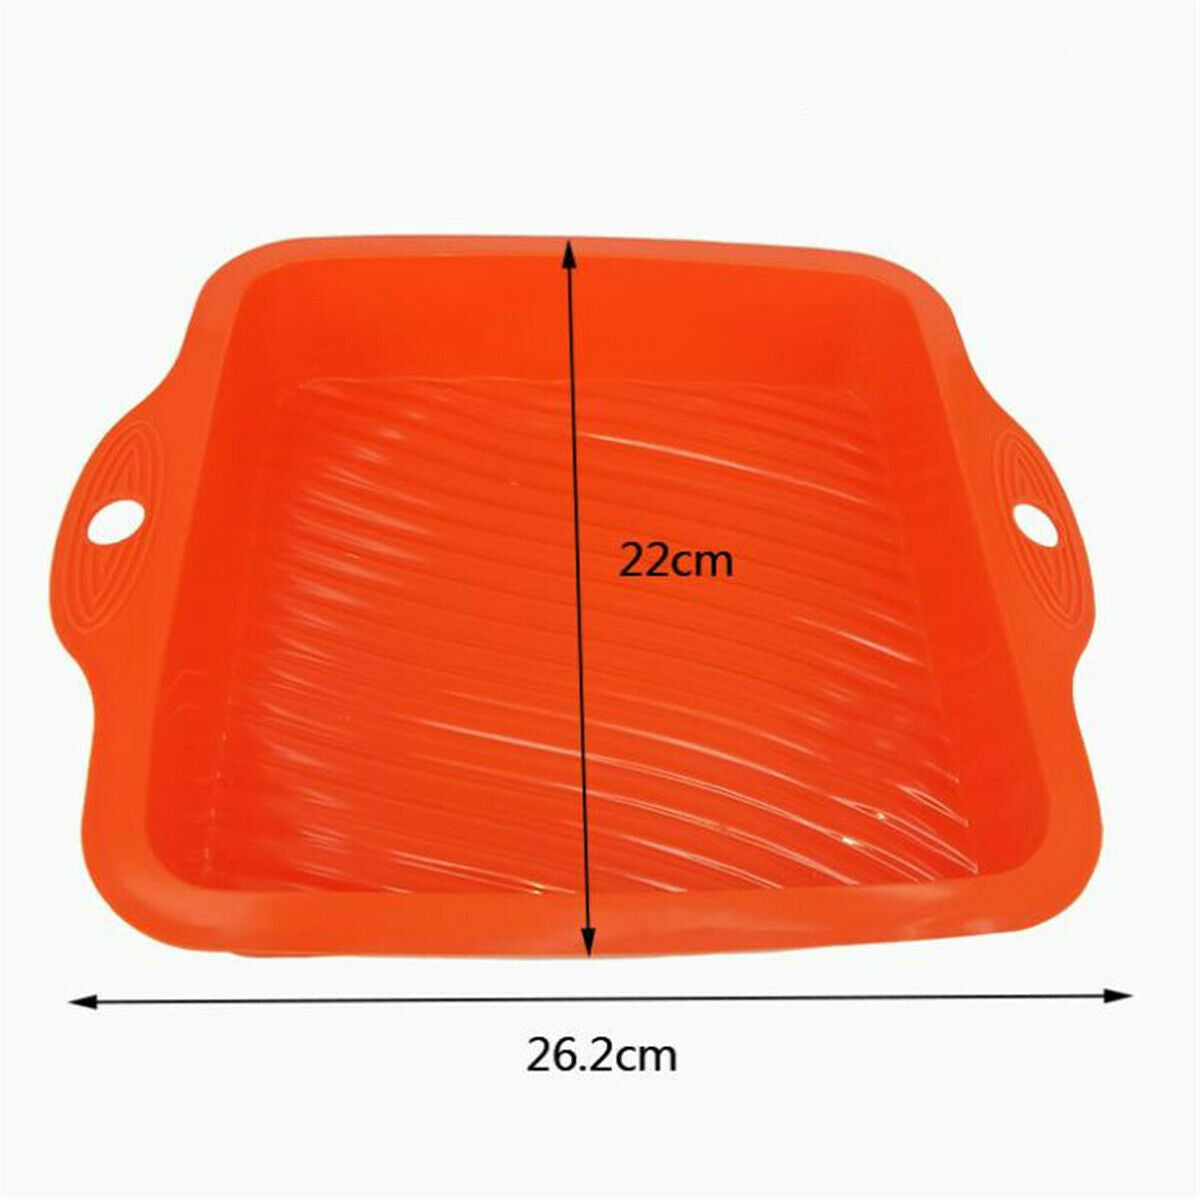 Square Silicone Cake Mold Pan Bread Chocolate Pizza Pastry Baking Tray DIY Mould